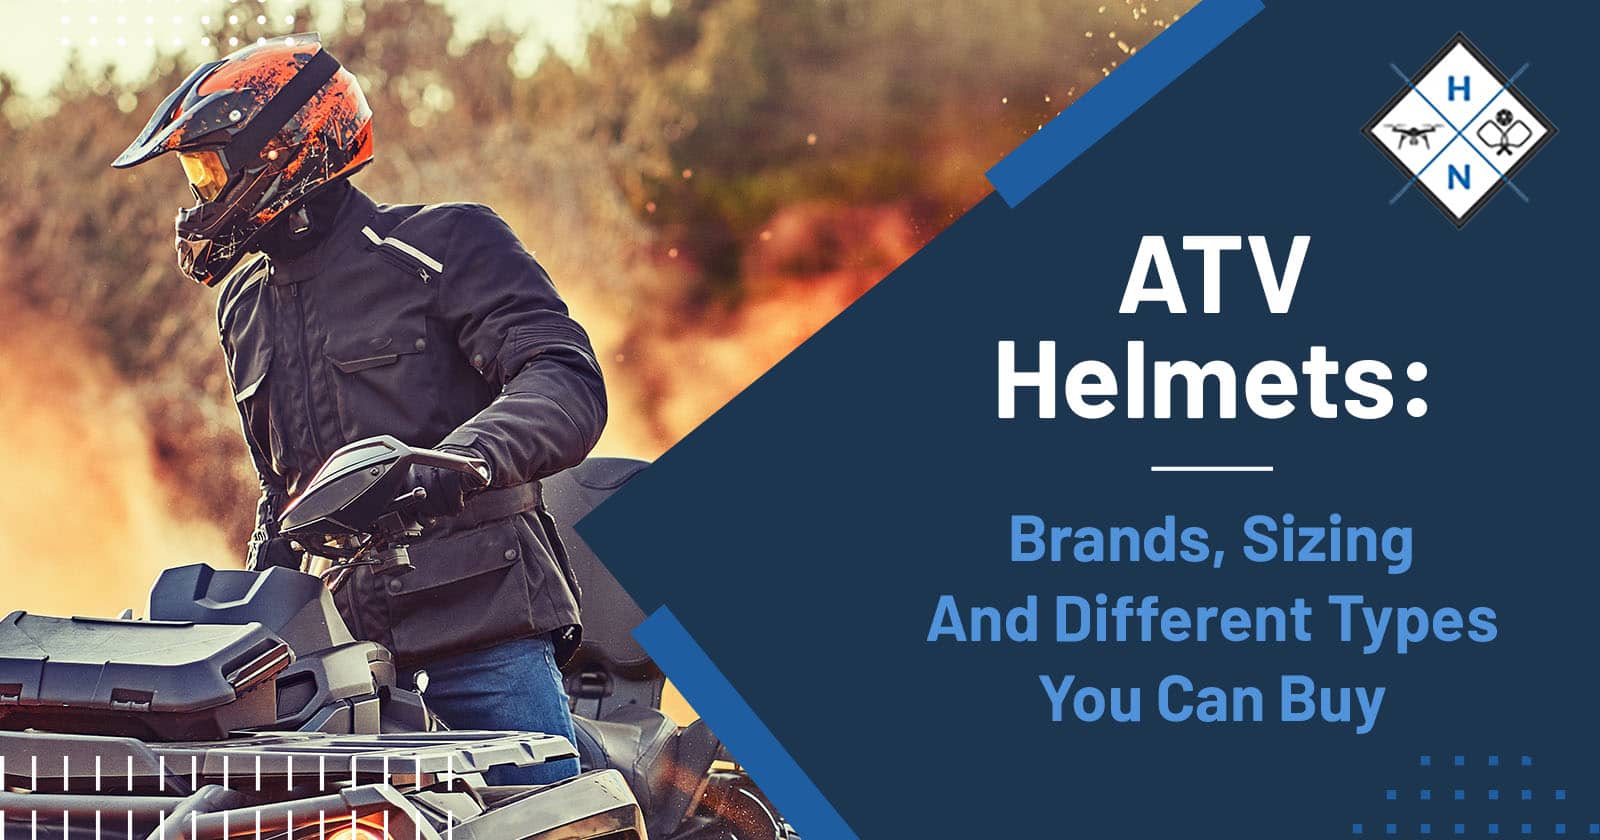 ATV Helmets: Brands, Sizing And Different Types You Can Buy